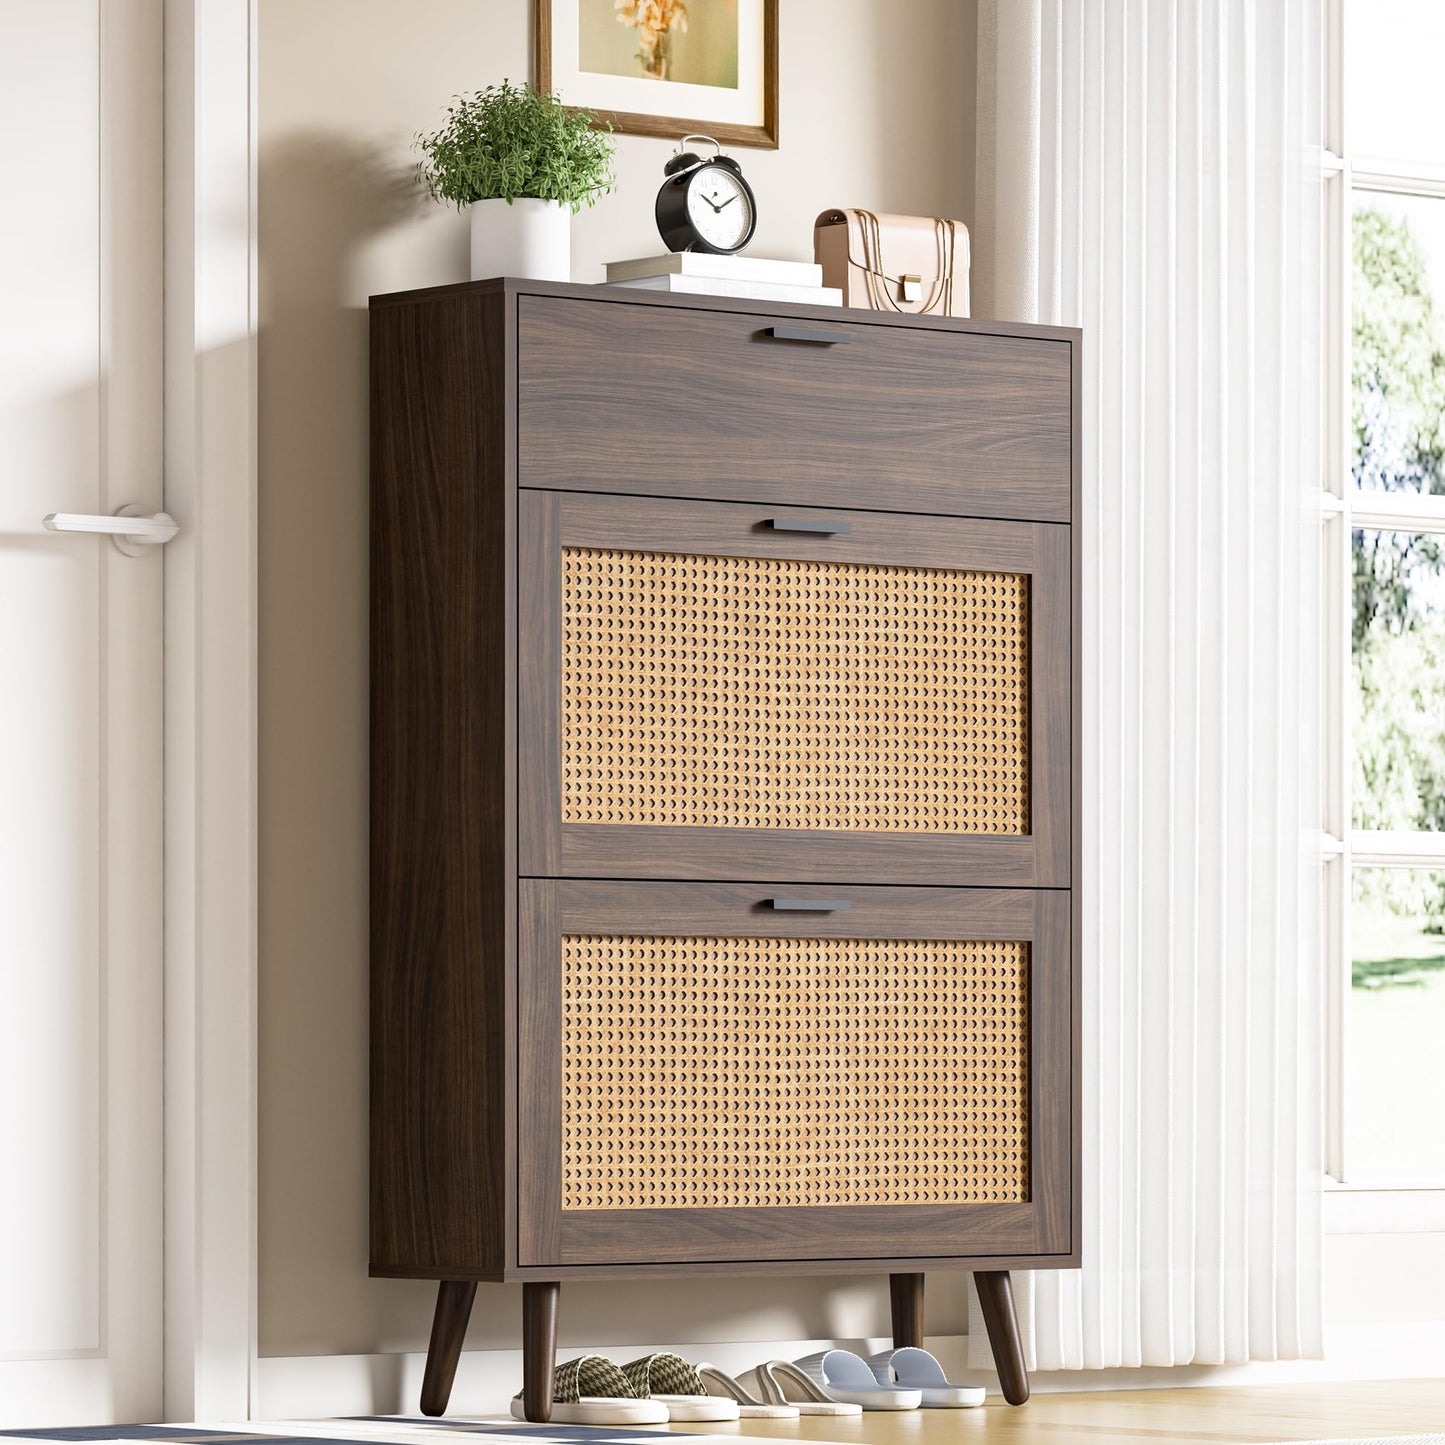 Shoe Cabinet Storage for Entryway, Narrow Shoe Cabinet with 2 Flip Drawers and Hidden Cabinet, Rattan Shoe Cabinet for Entryway, Hallway, Entrance,